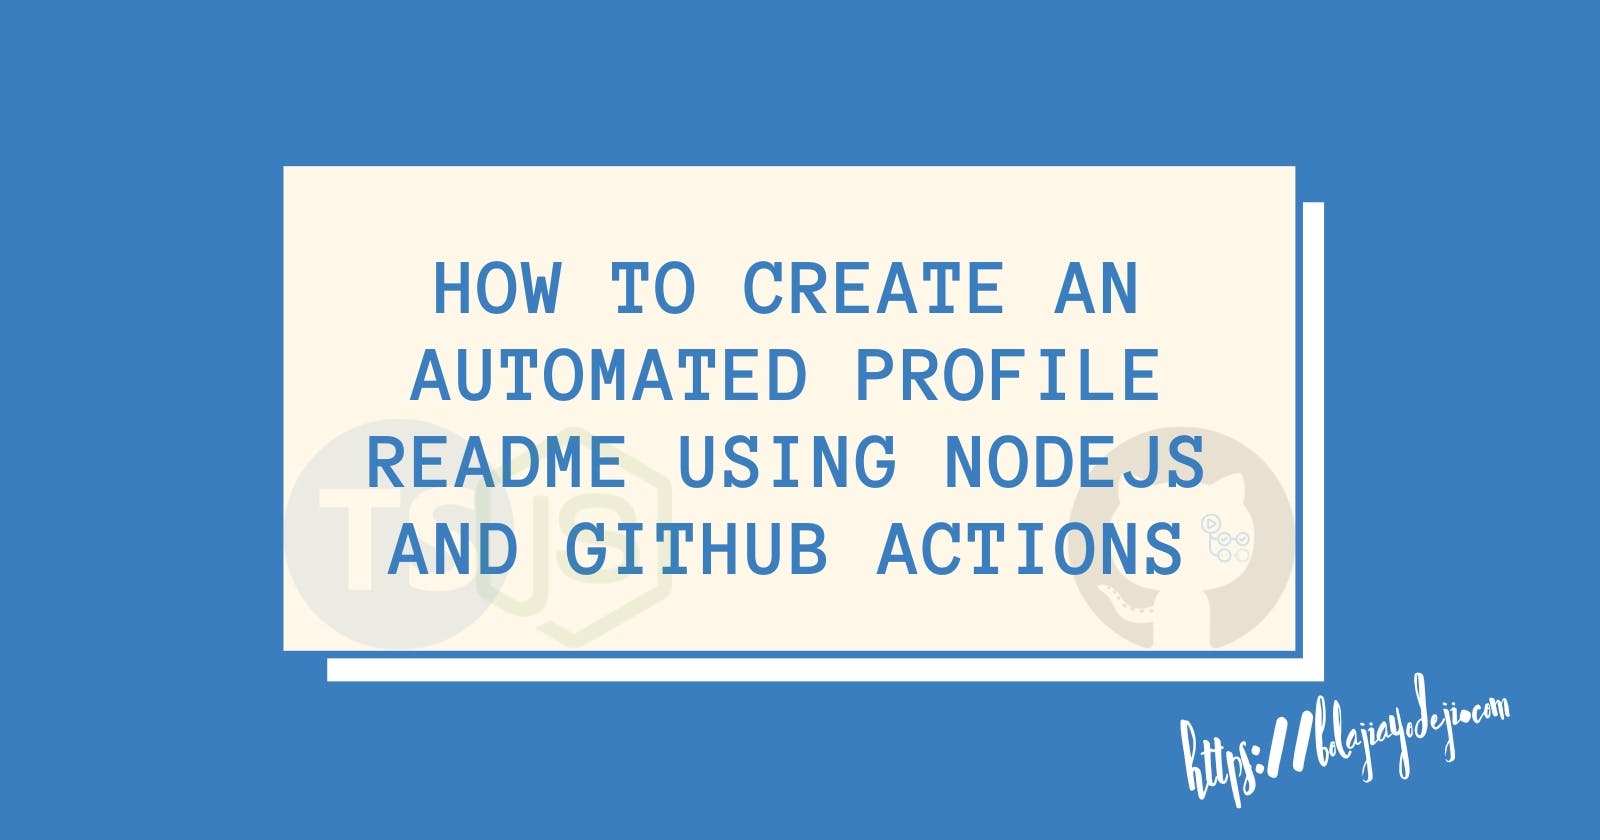 How to Create an Automated Profile README using Nodejs and GitHub Actions